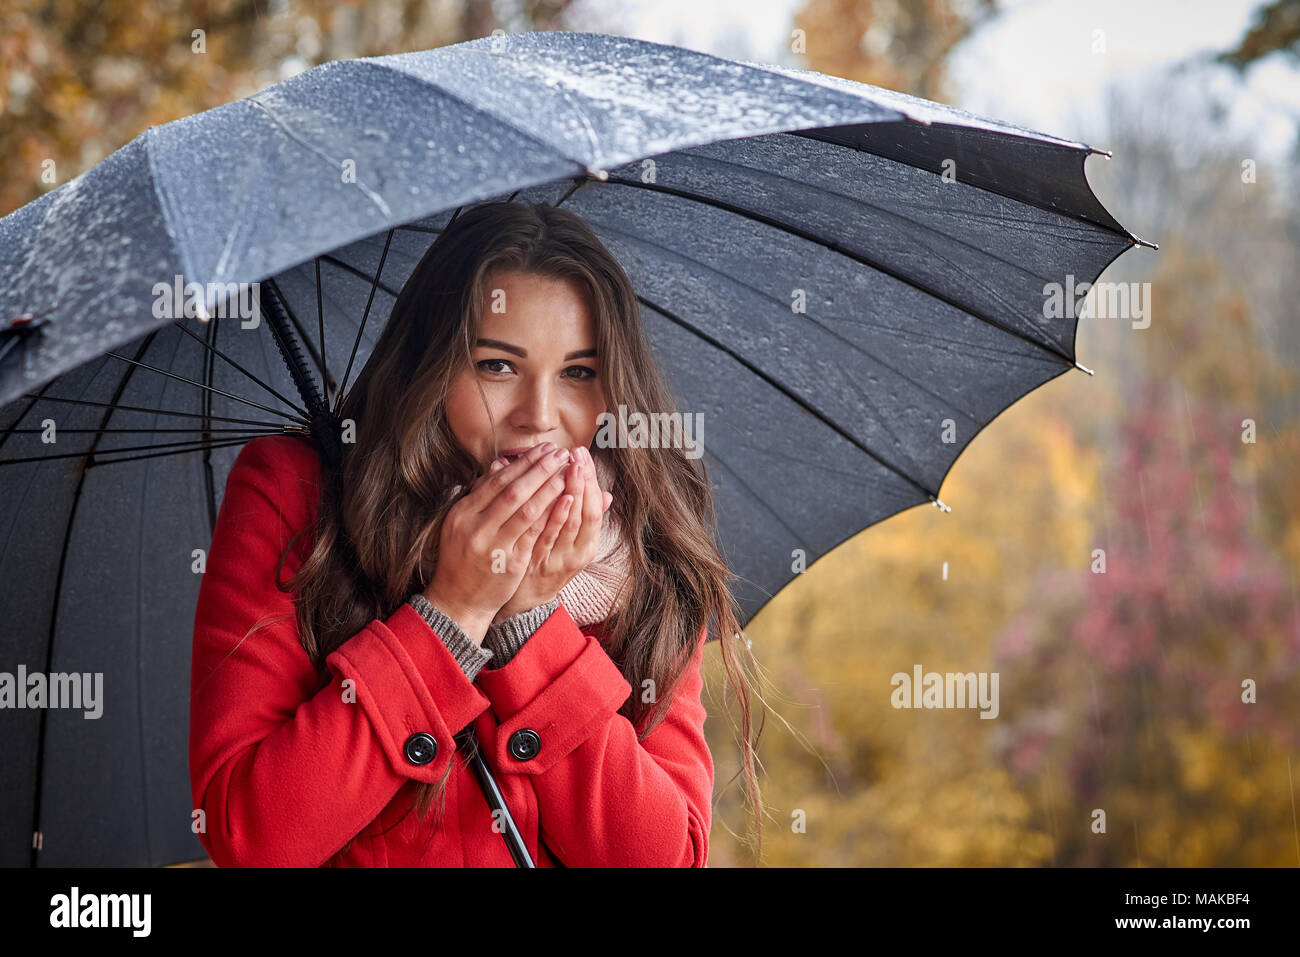 The girl under the umbrella warms her hands with her breath Stock Photo